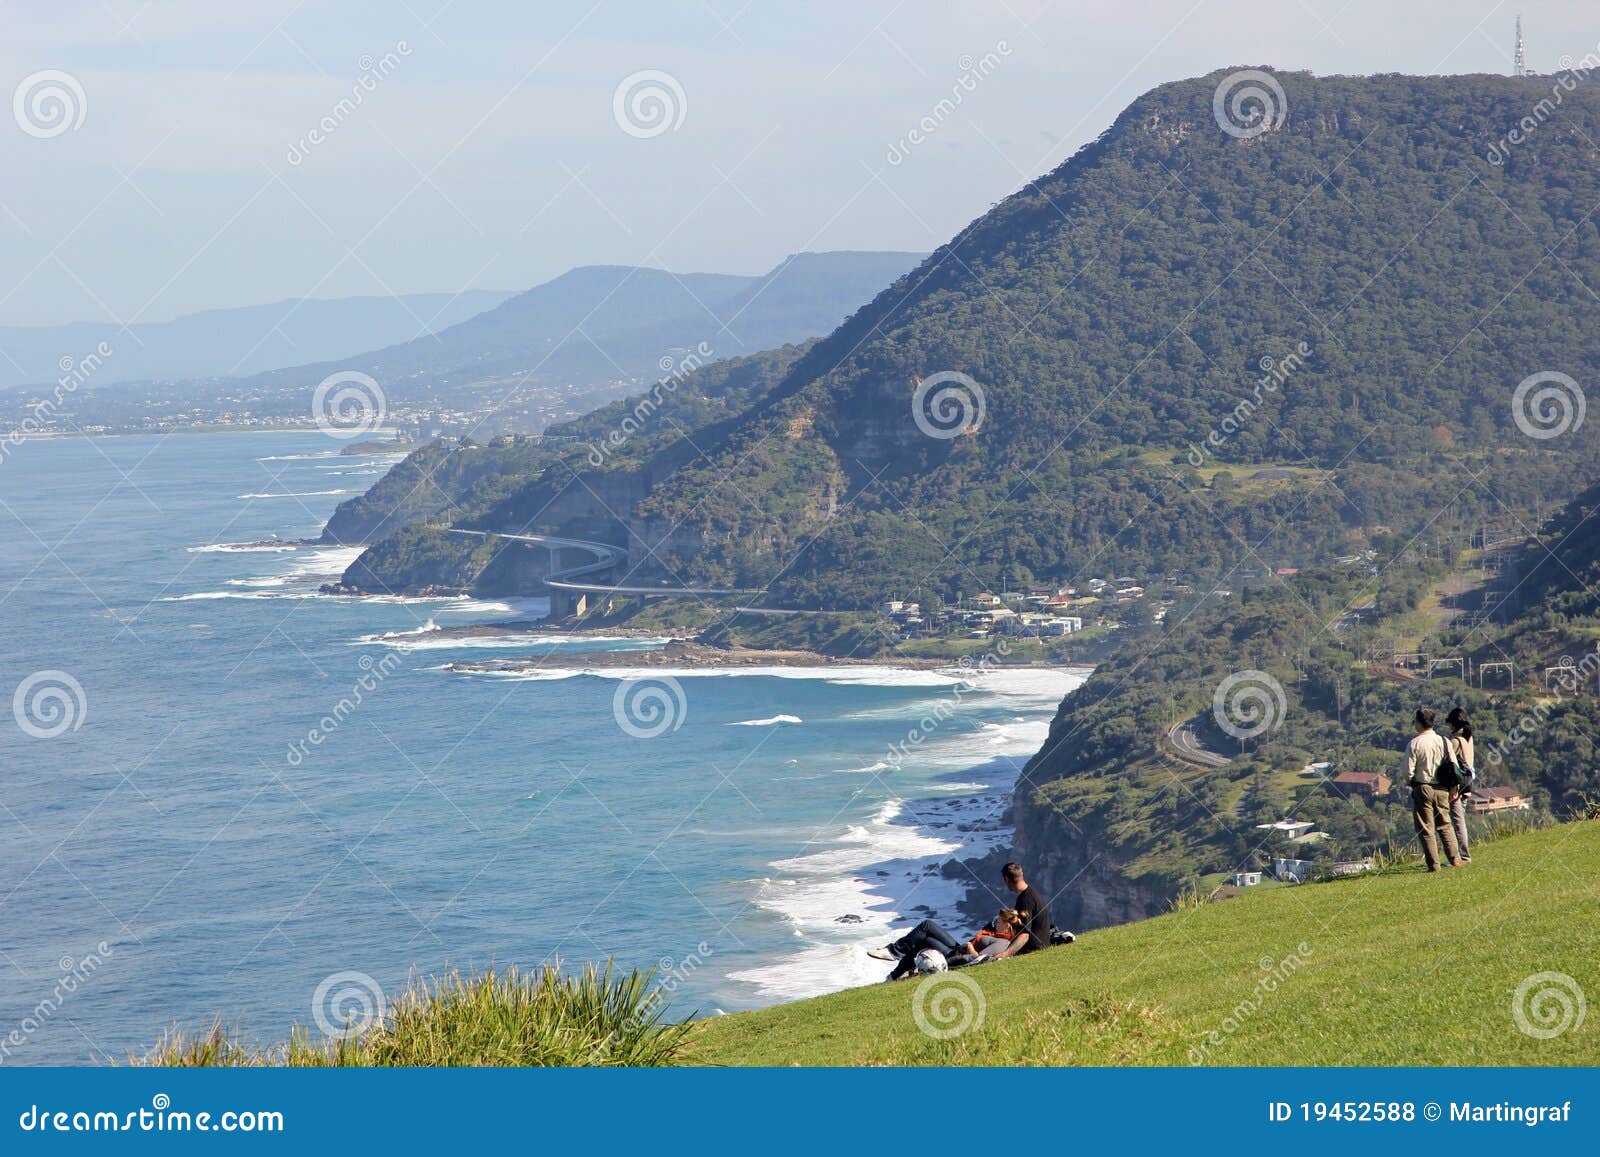 famous drive at scenic coastline view from lookout